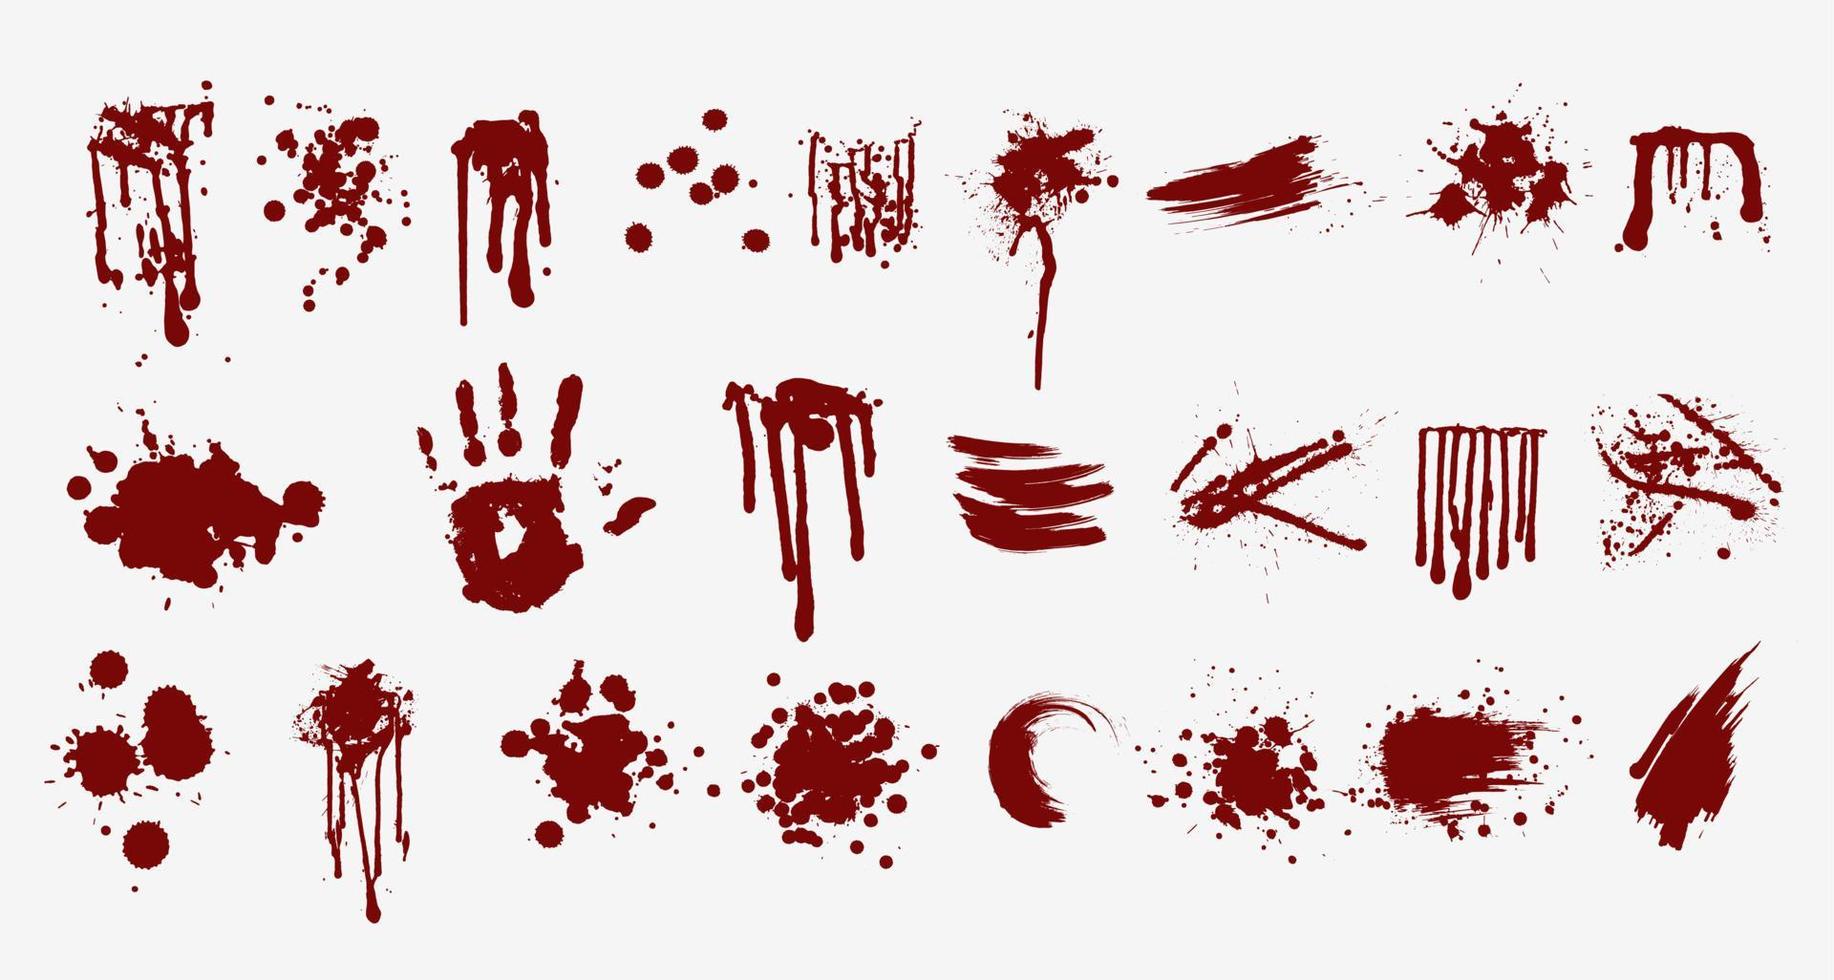 Various blood or paint splatters prints and splashes vector flat illustration. Set of abstract colorful red drops splashing elements isolated on white background